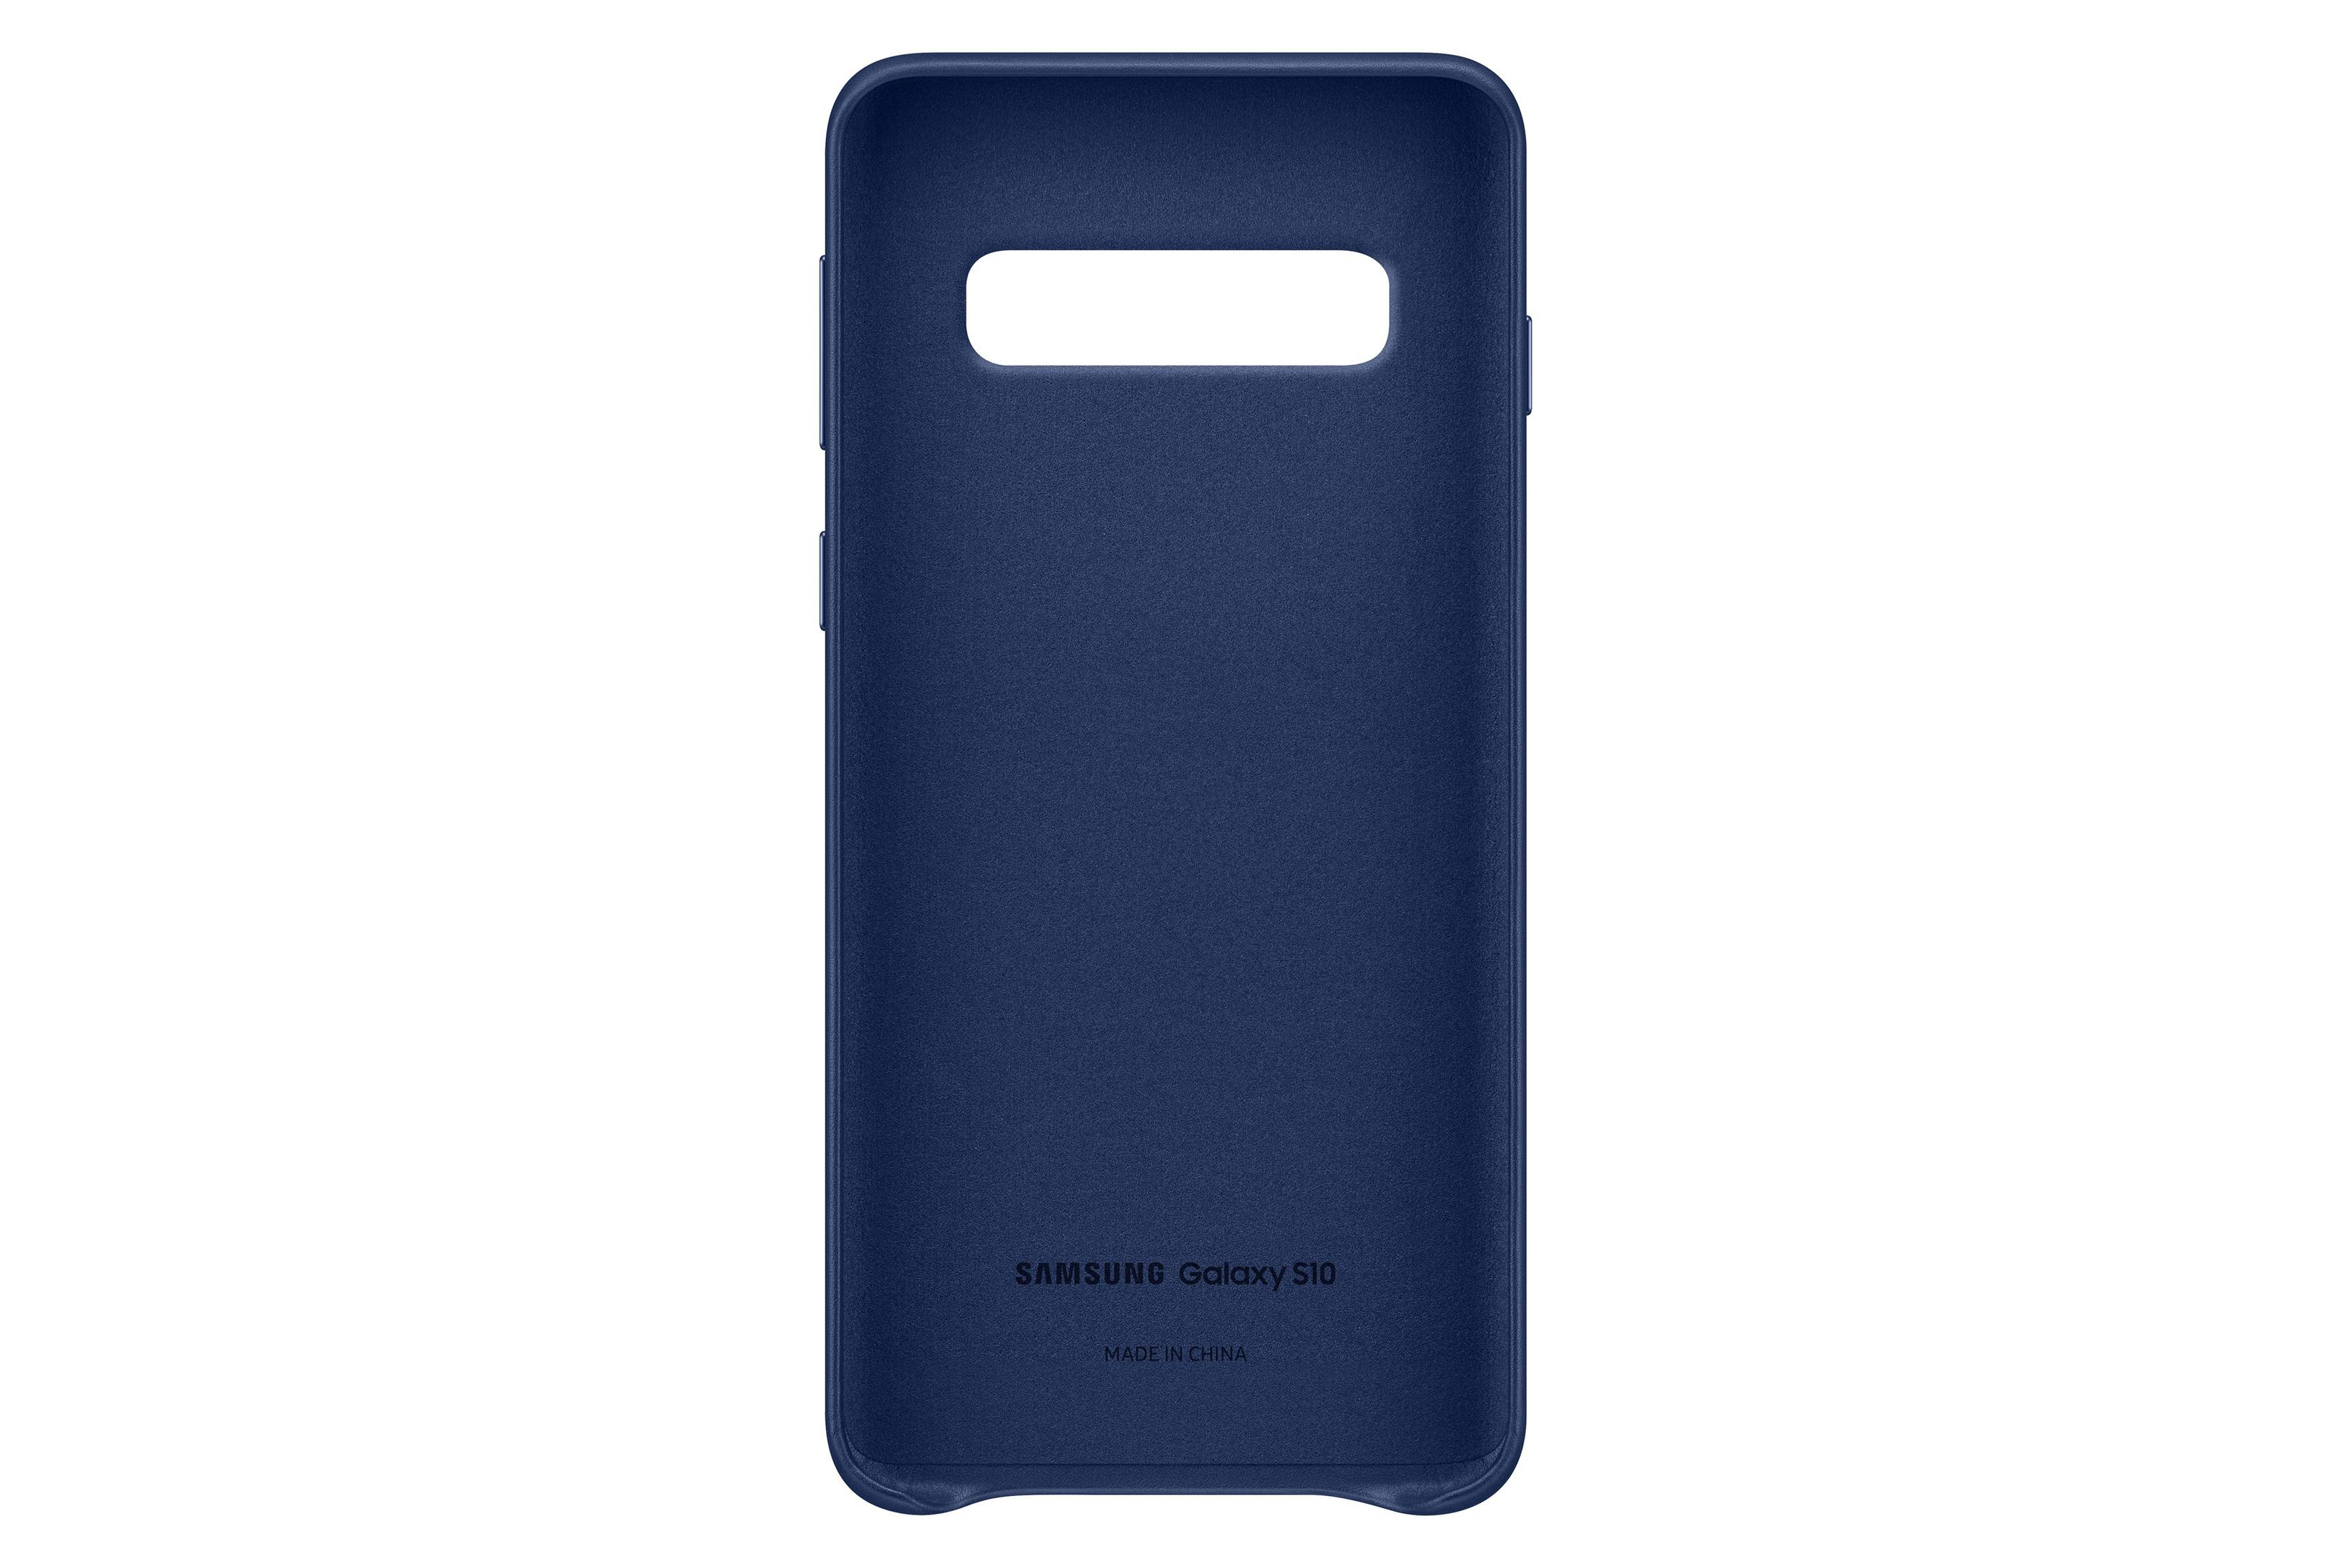 SAMSUNG EF-VG973LNEGWW S10 S10, NAVY, Galaxy Samsung, Backcover, COVER Navy LEATHER